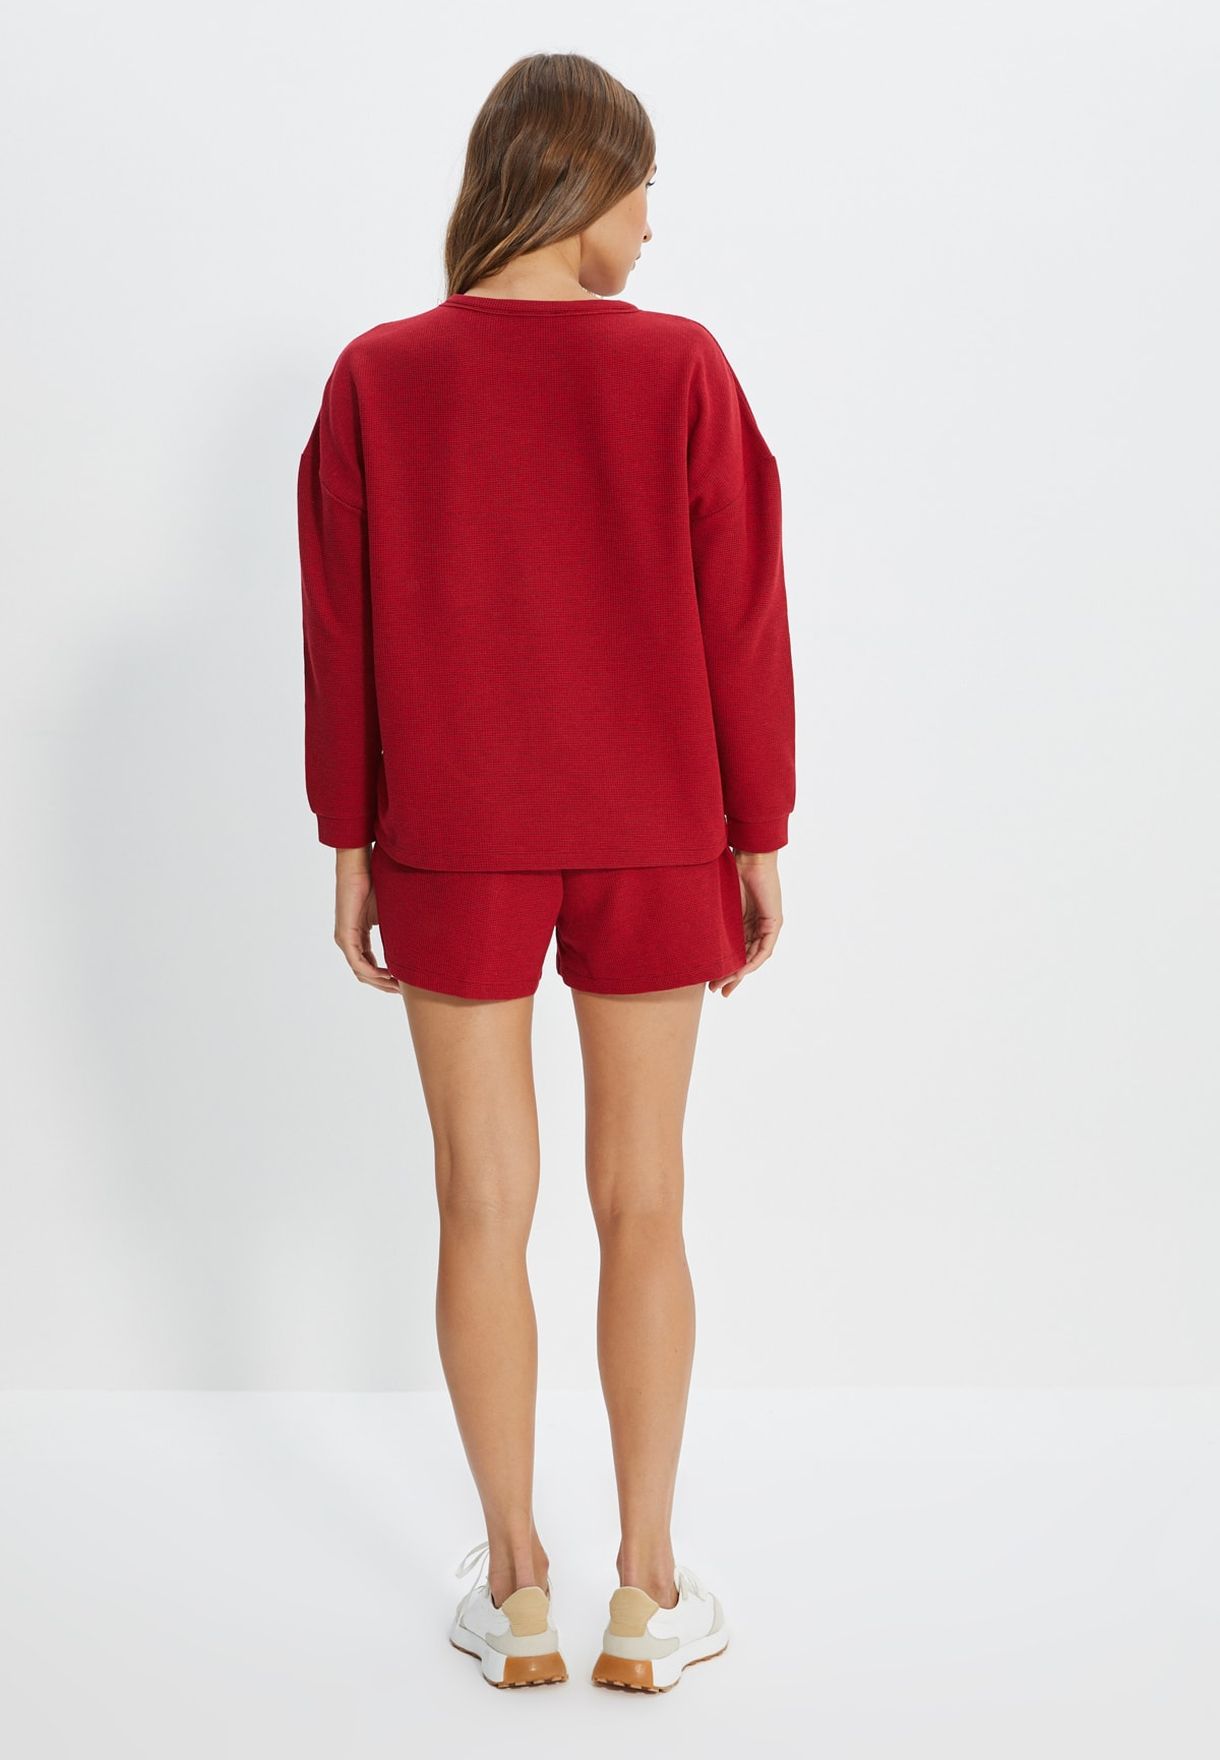 Crew Neck Knitted Top & Shorts Set